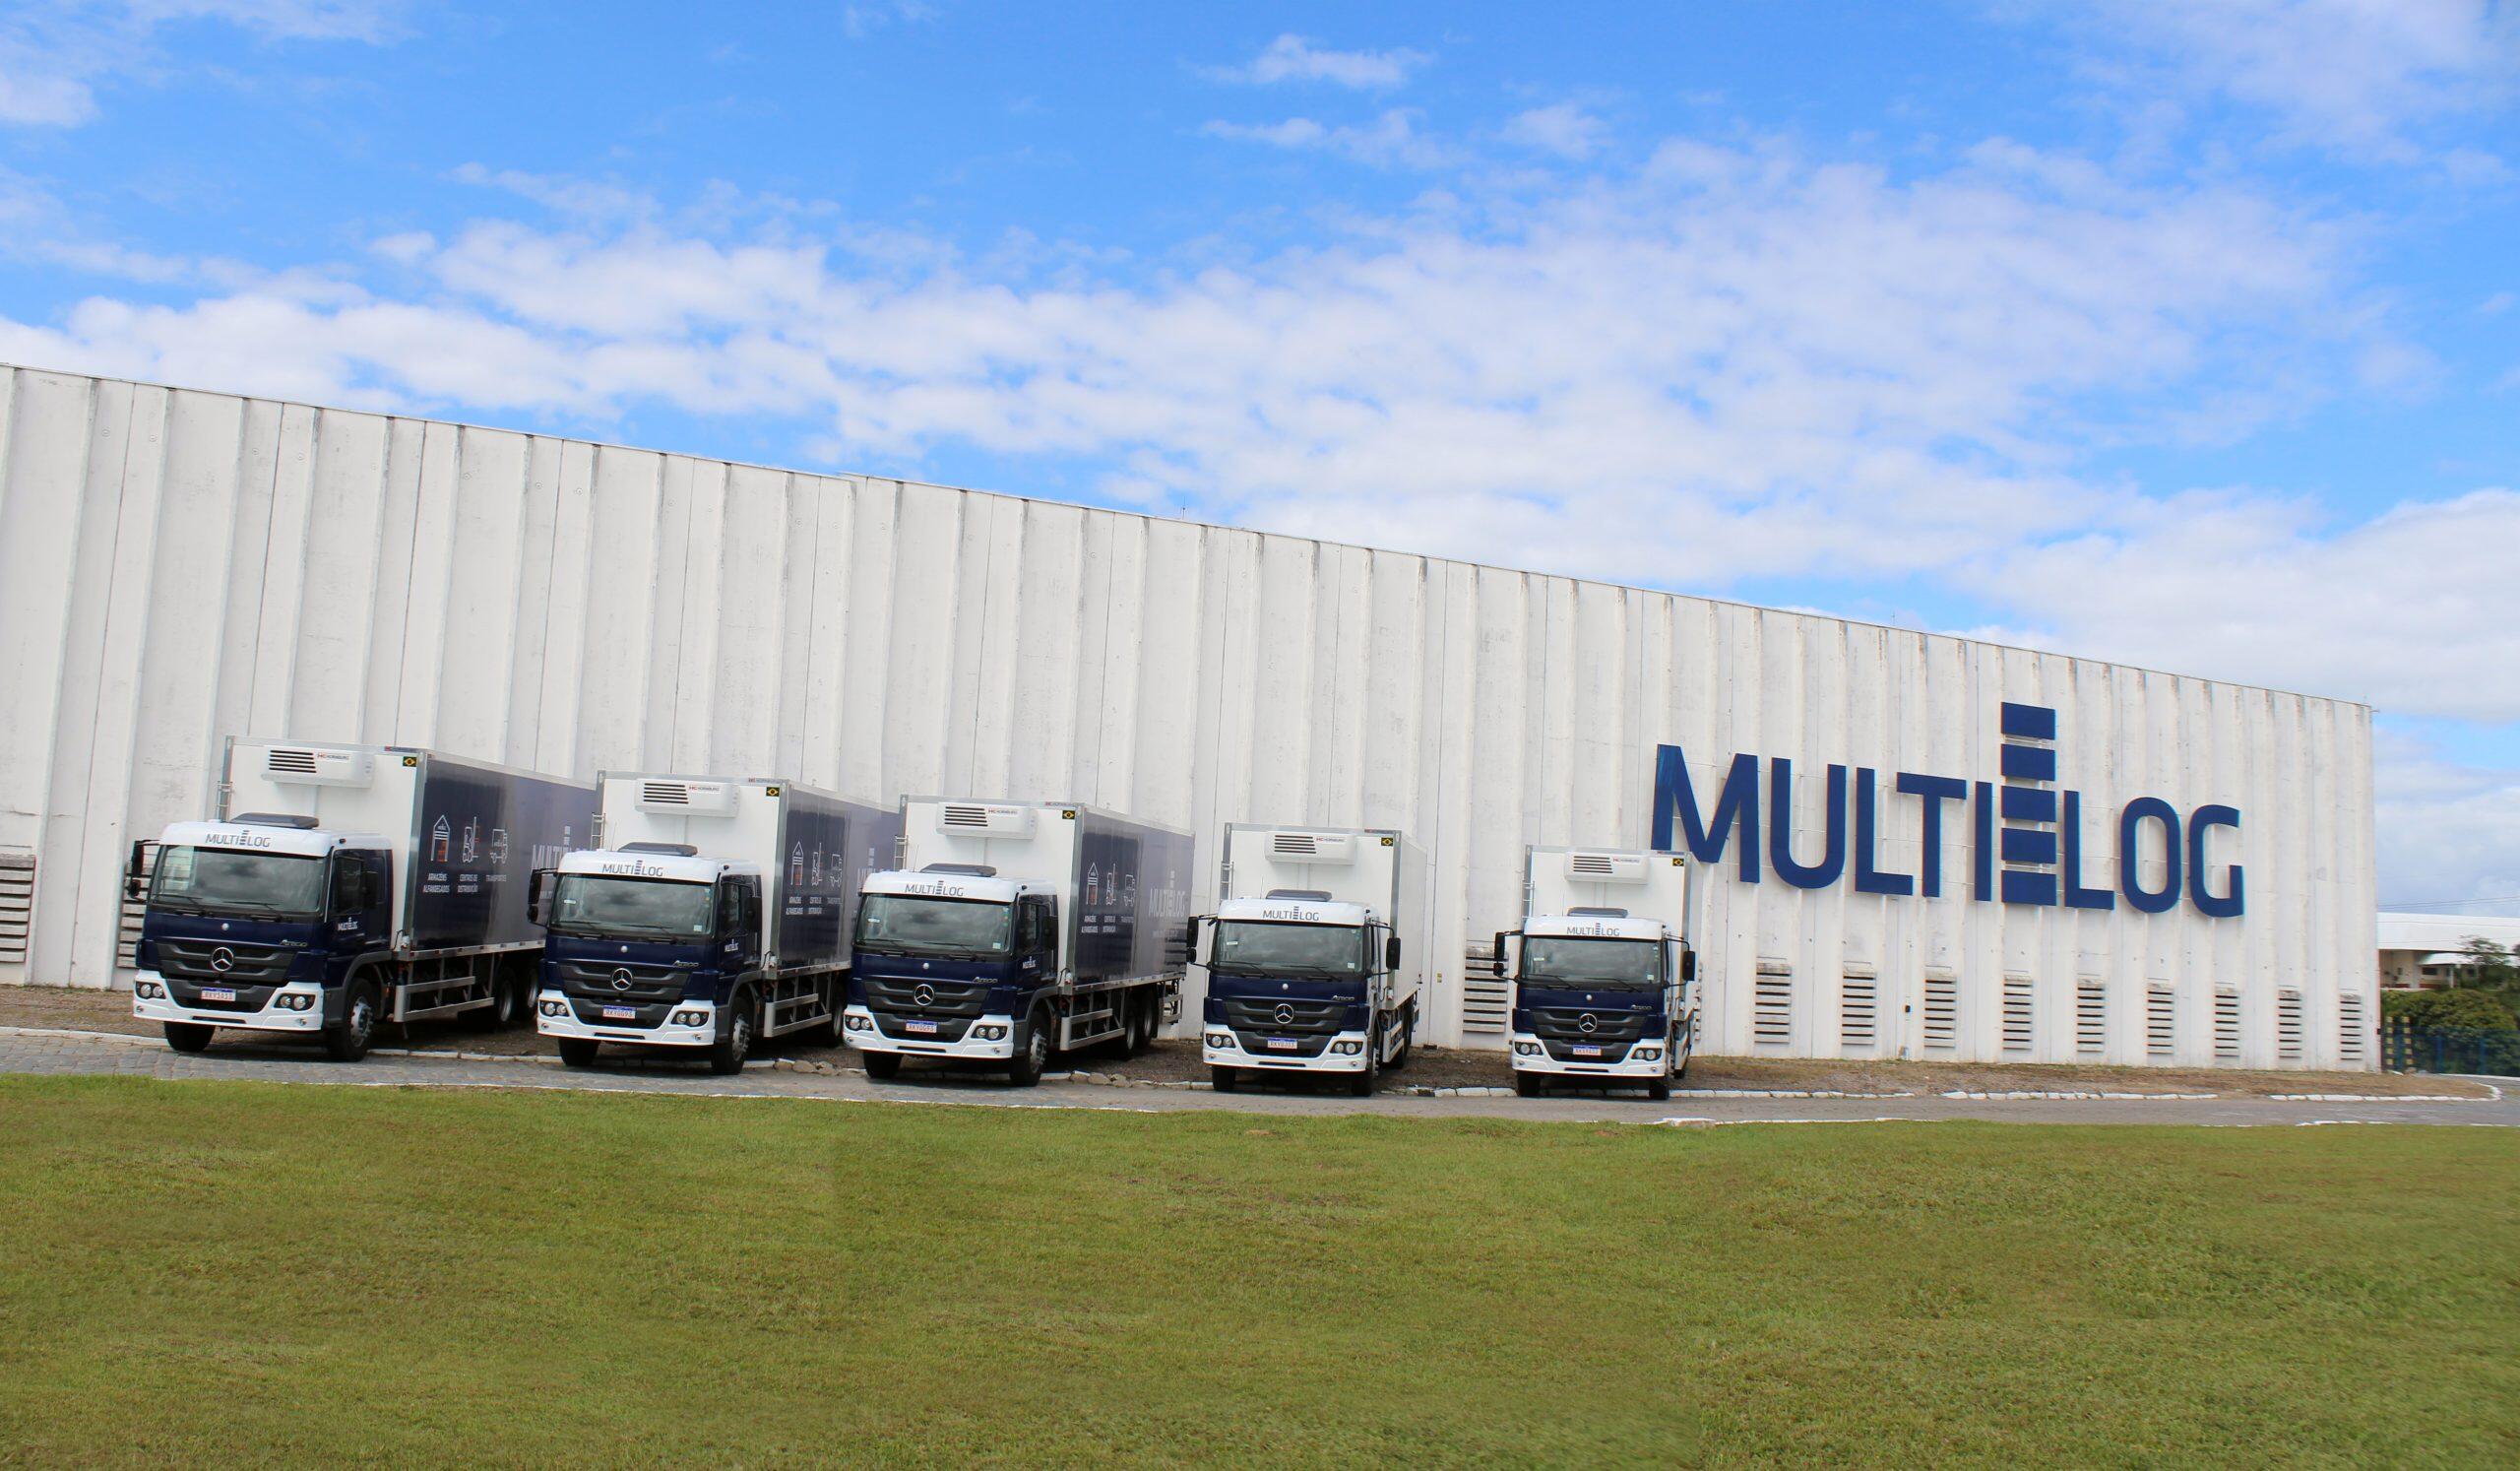 Multilog buys 5 new trucks to meet transport demand in Viracopos